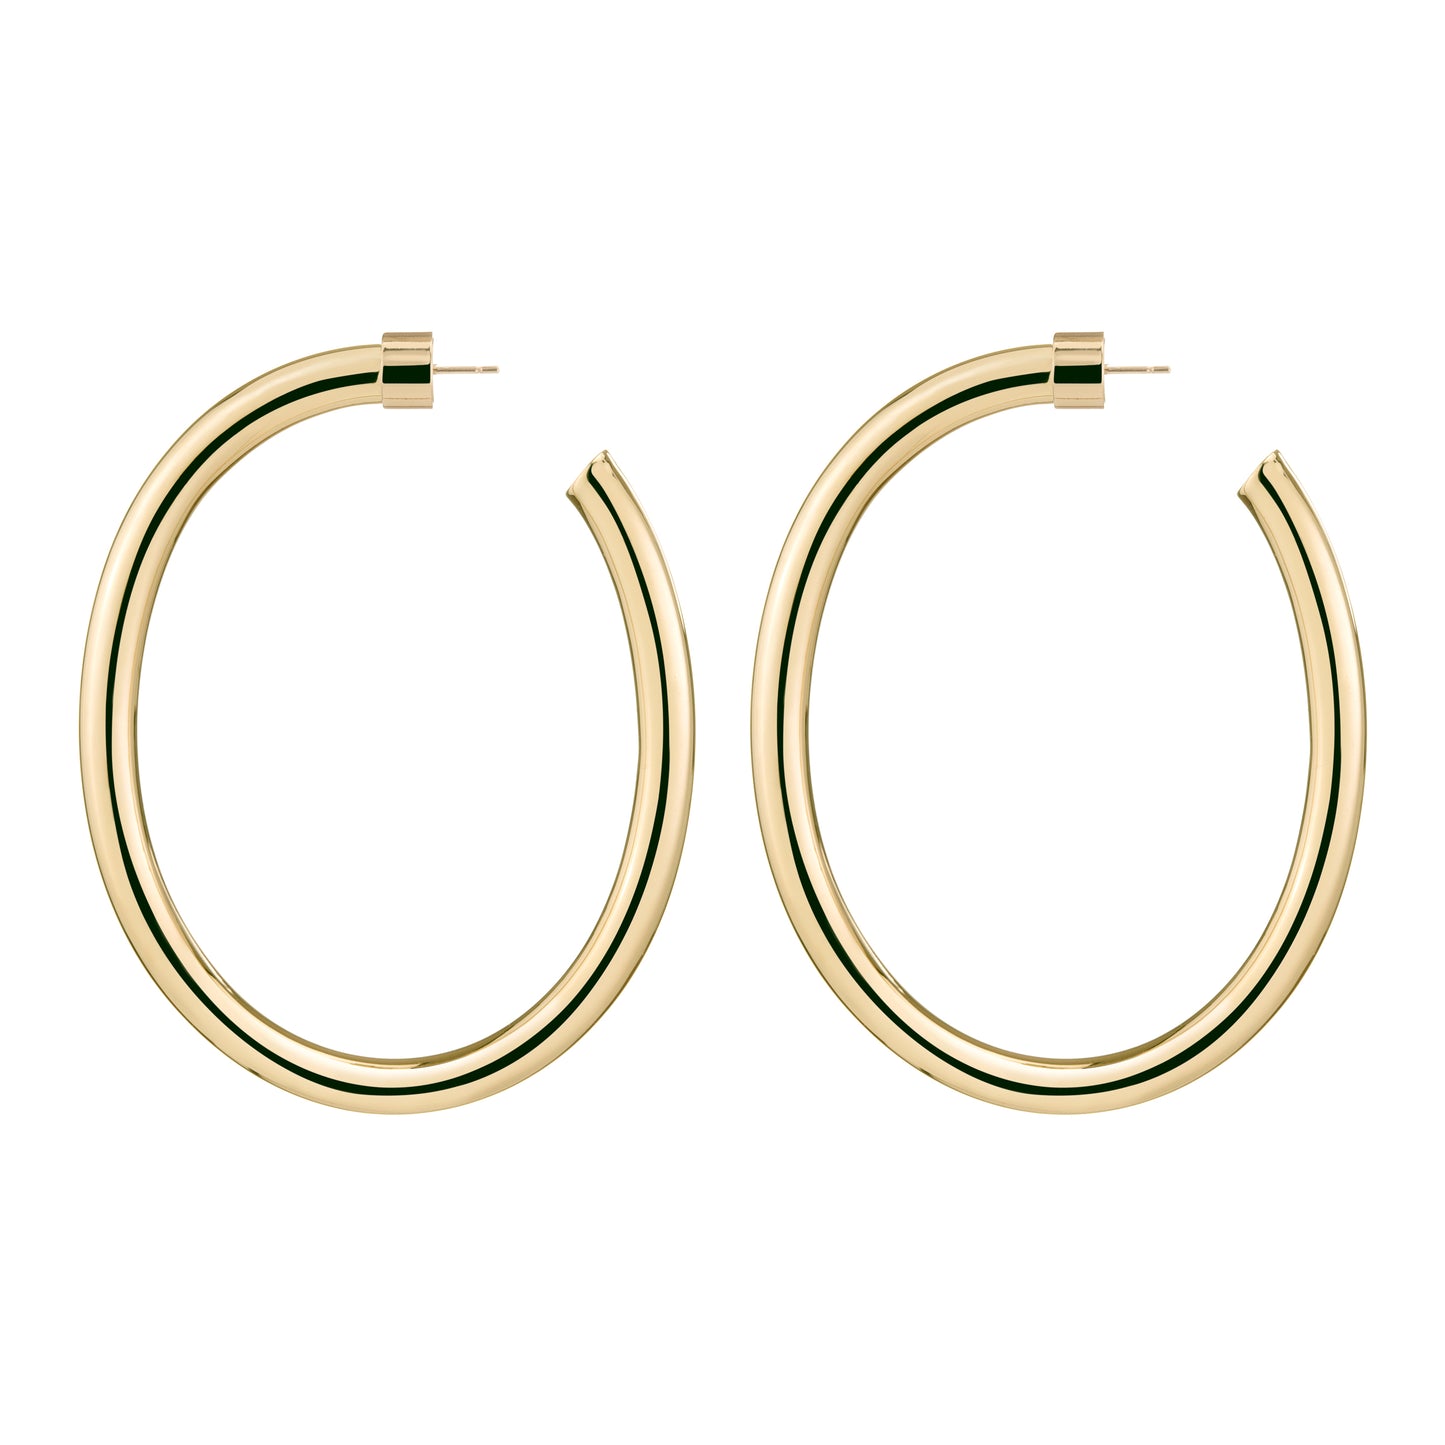 2" Thin Law Hoops